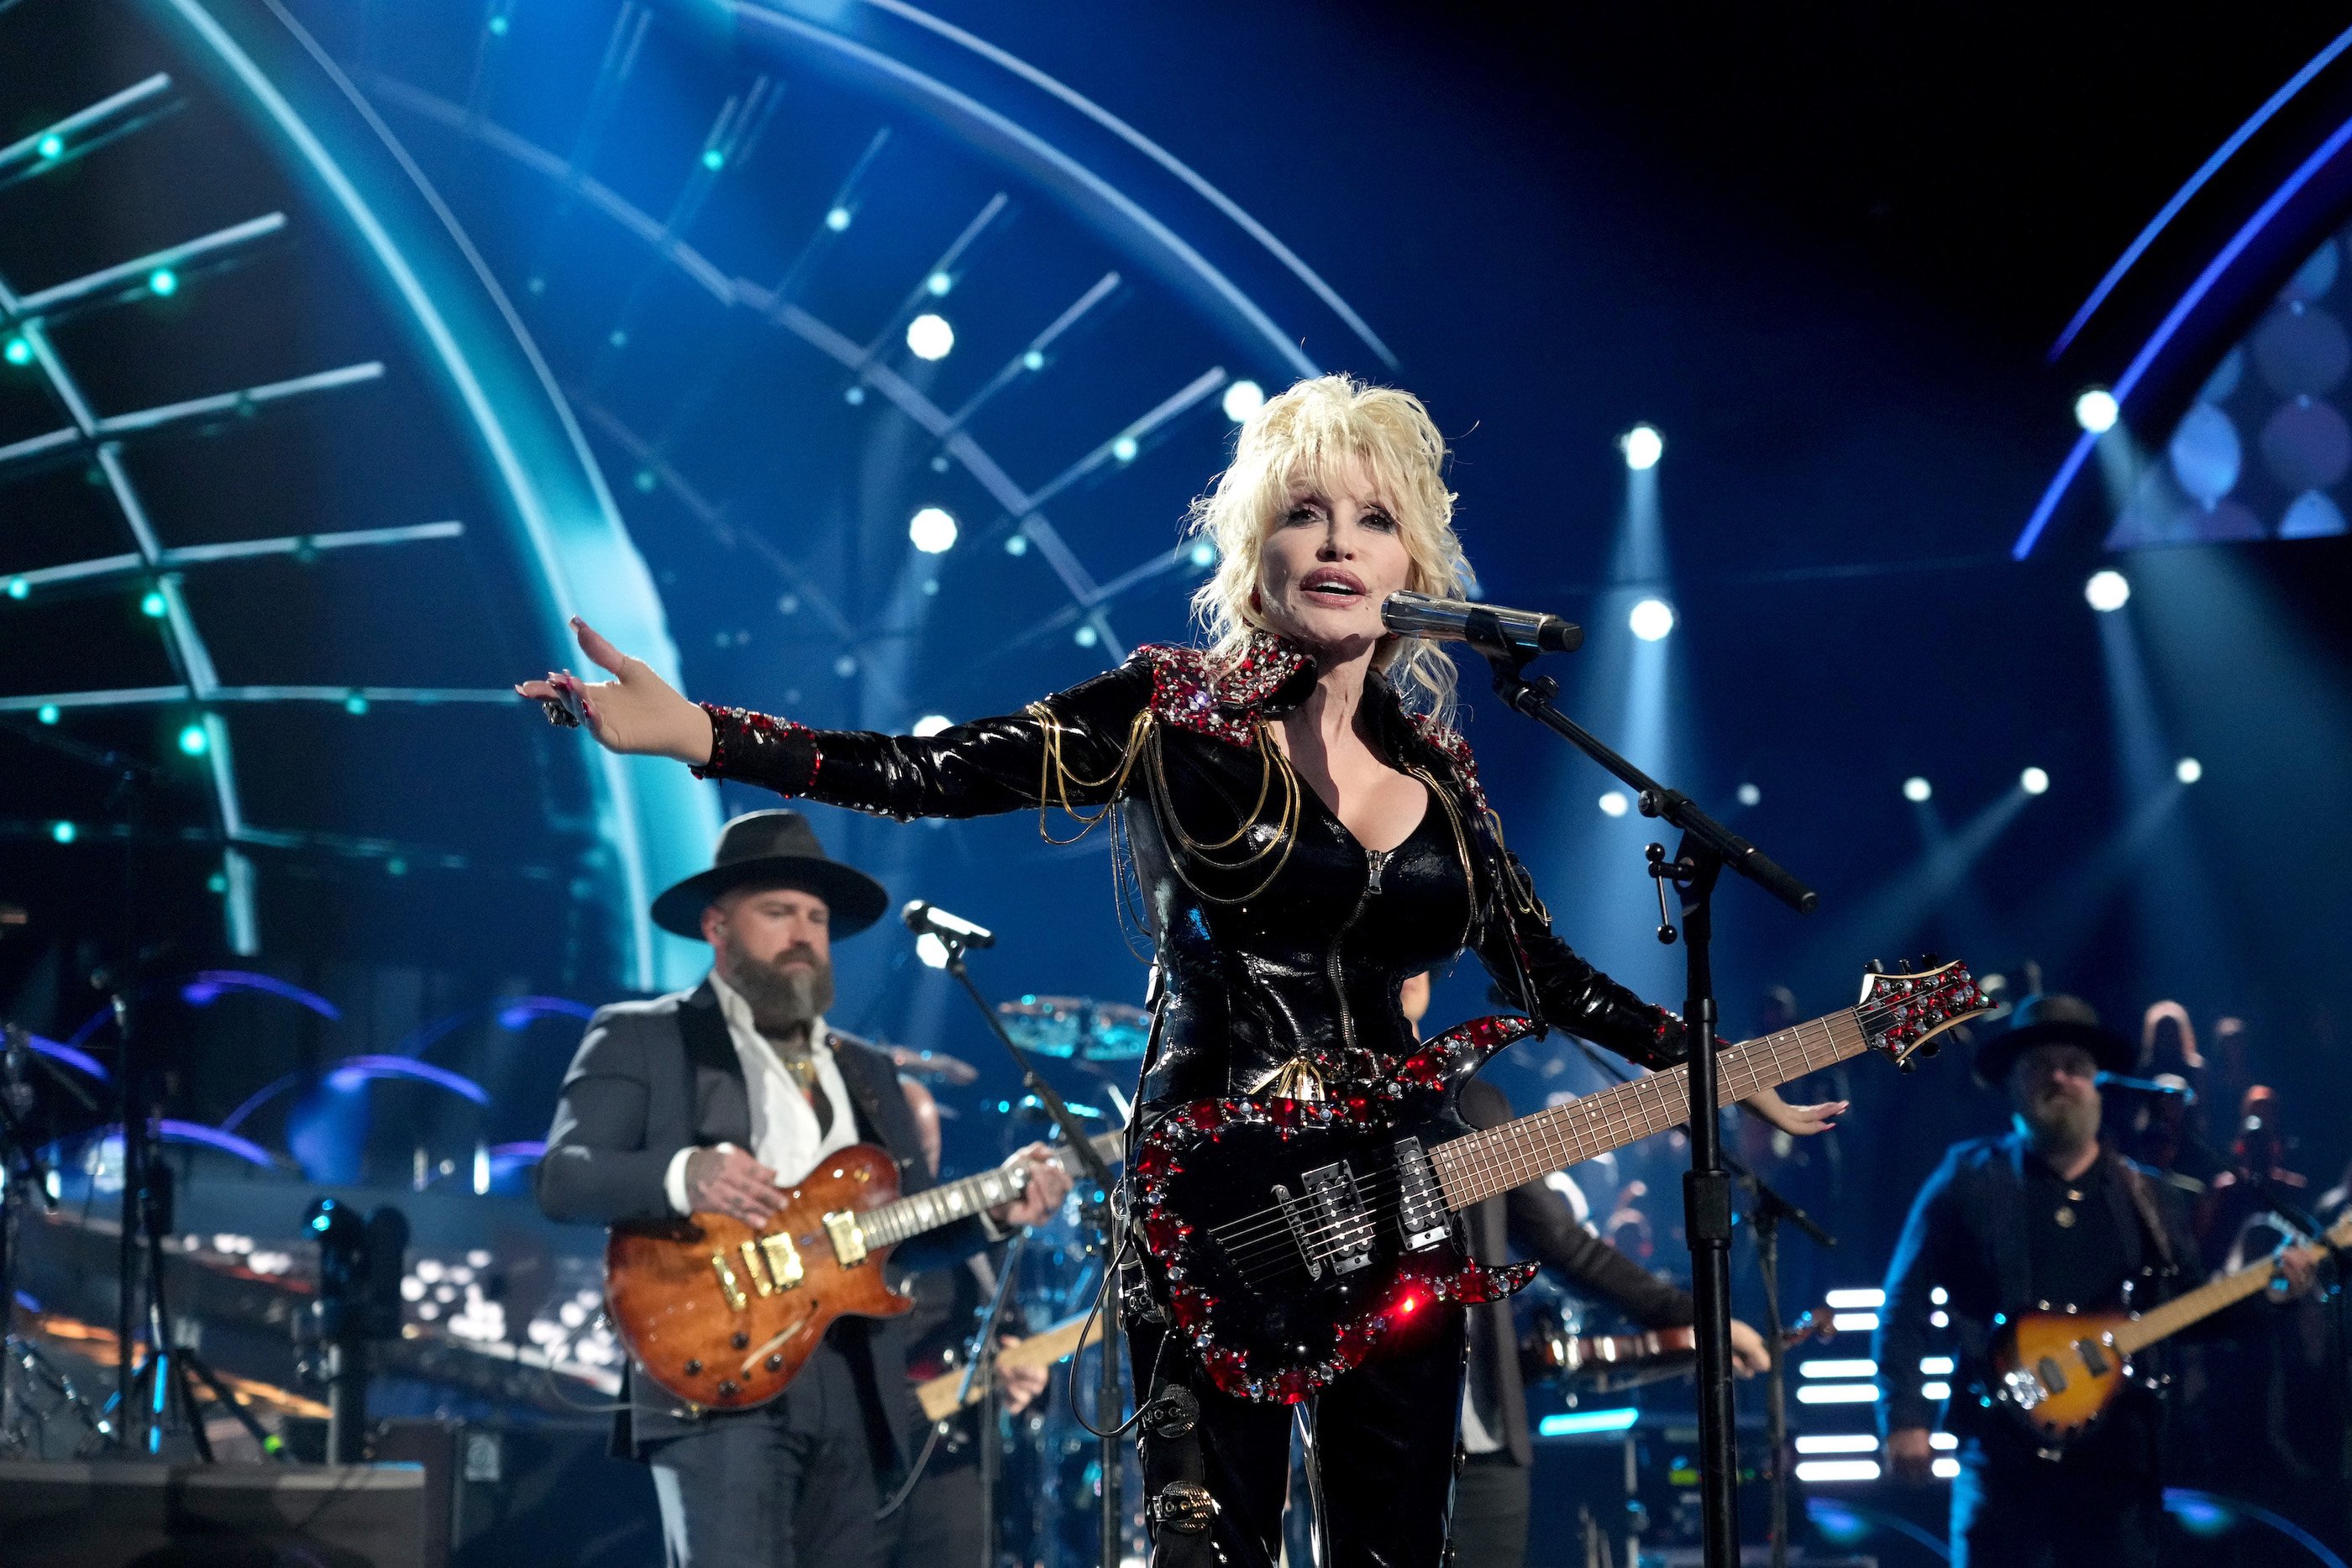 Inductee Dolly Parton performs onstage during attends the 37th Annual Rock & Roll Hall of Fame Induction Ceremony